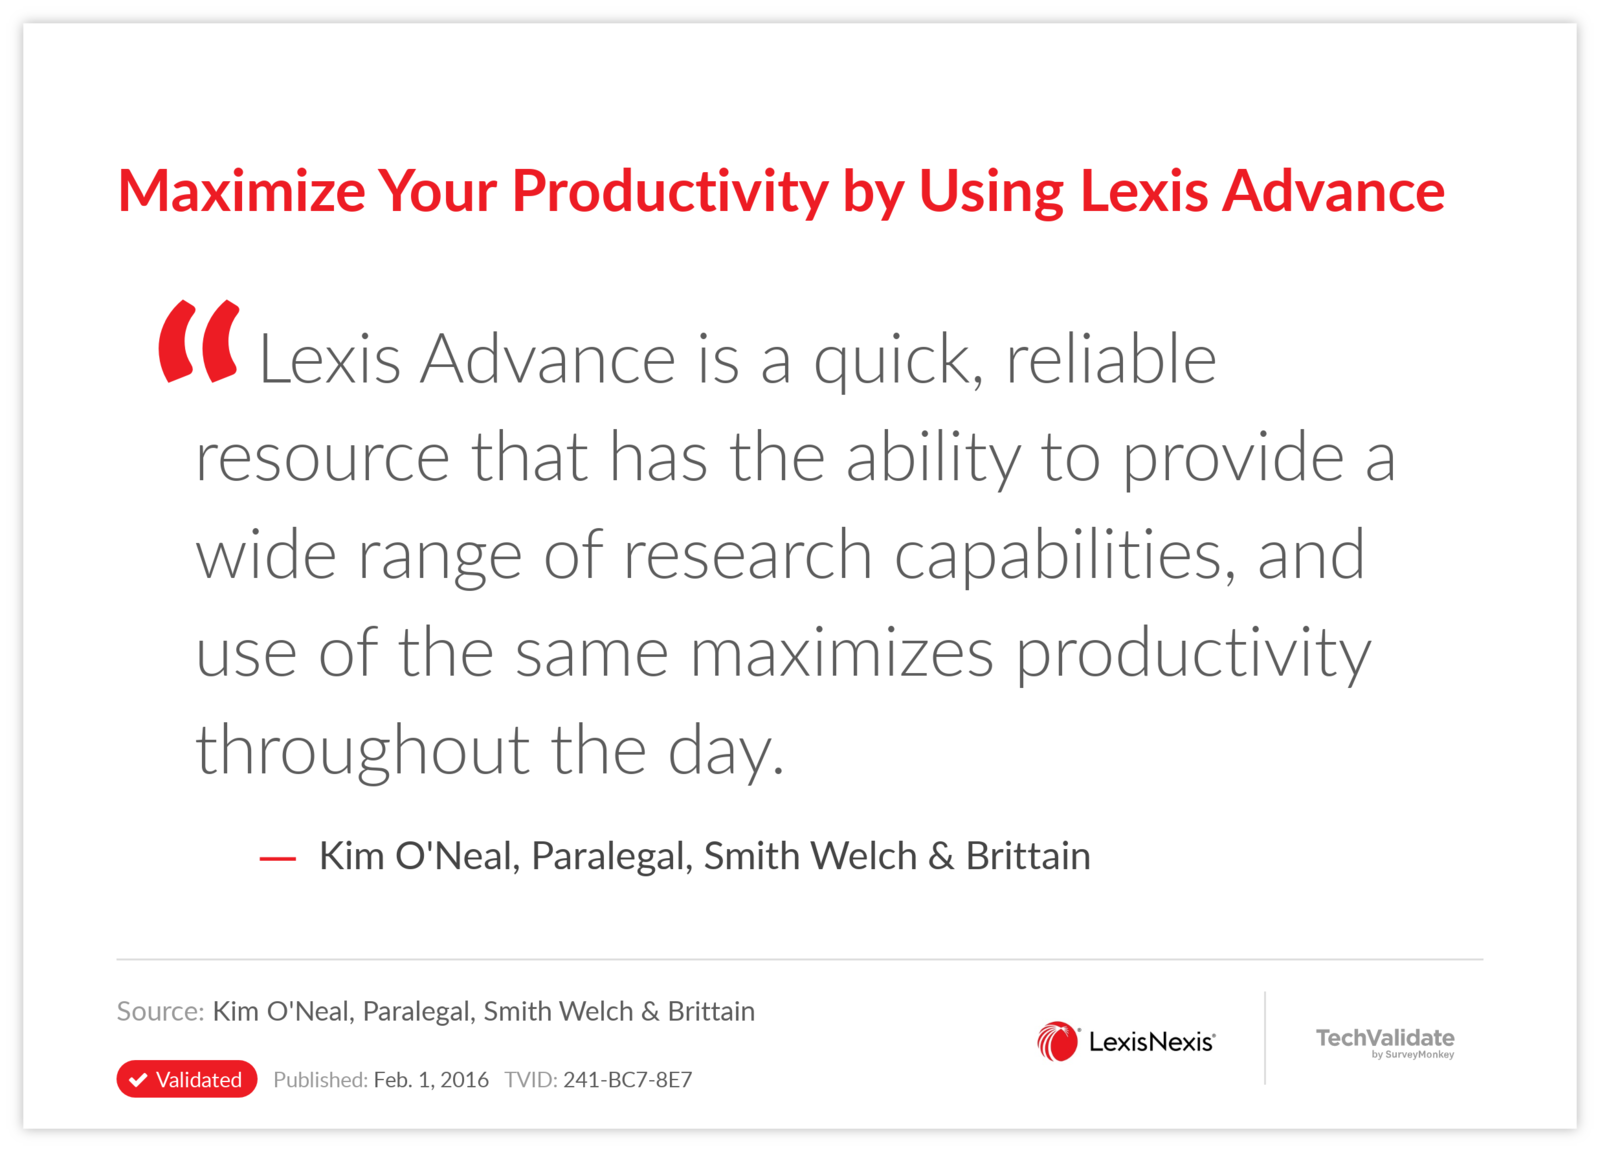 Maximize Your Productivity by Using Lexis Advance